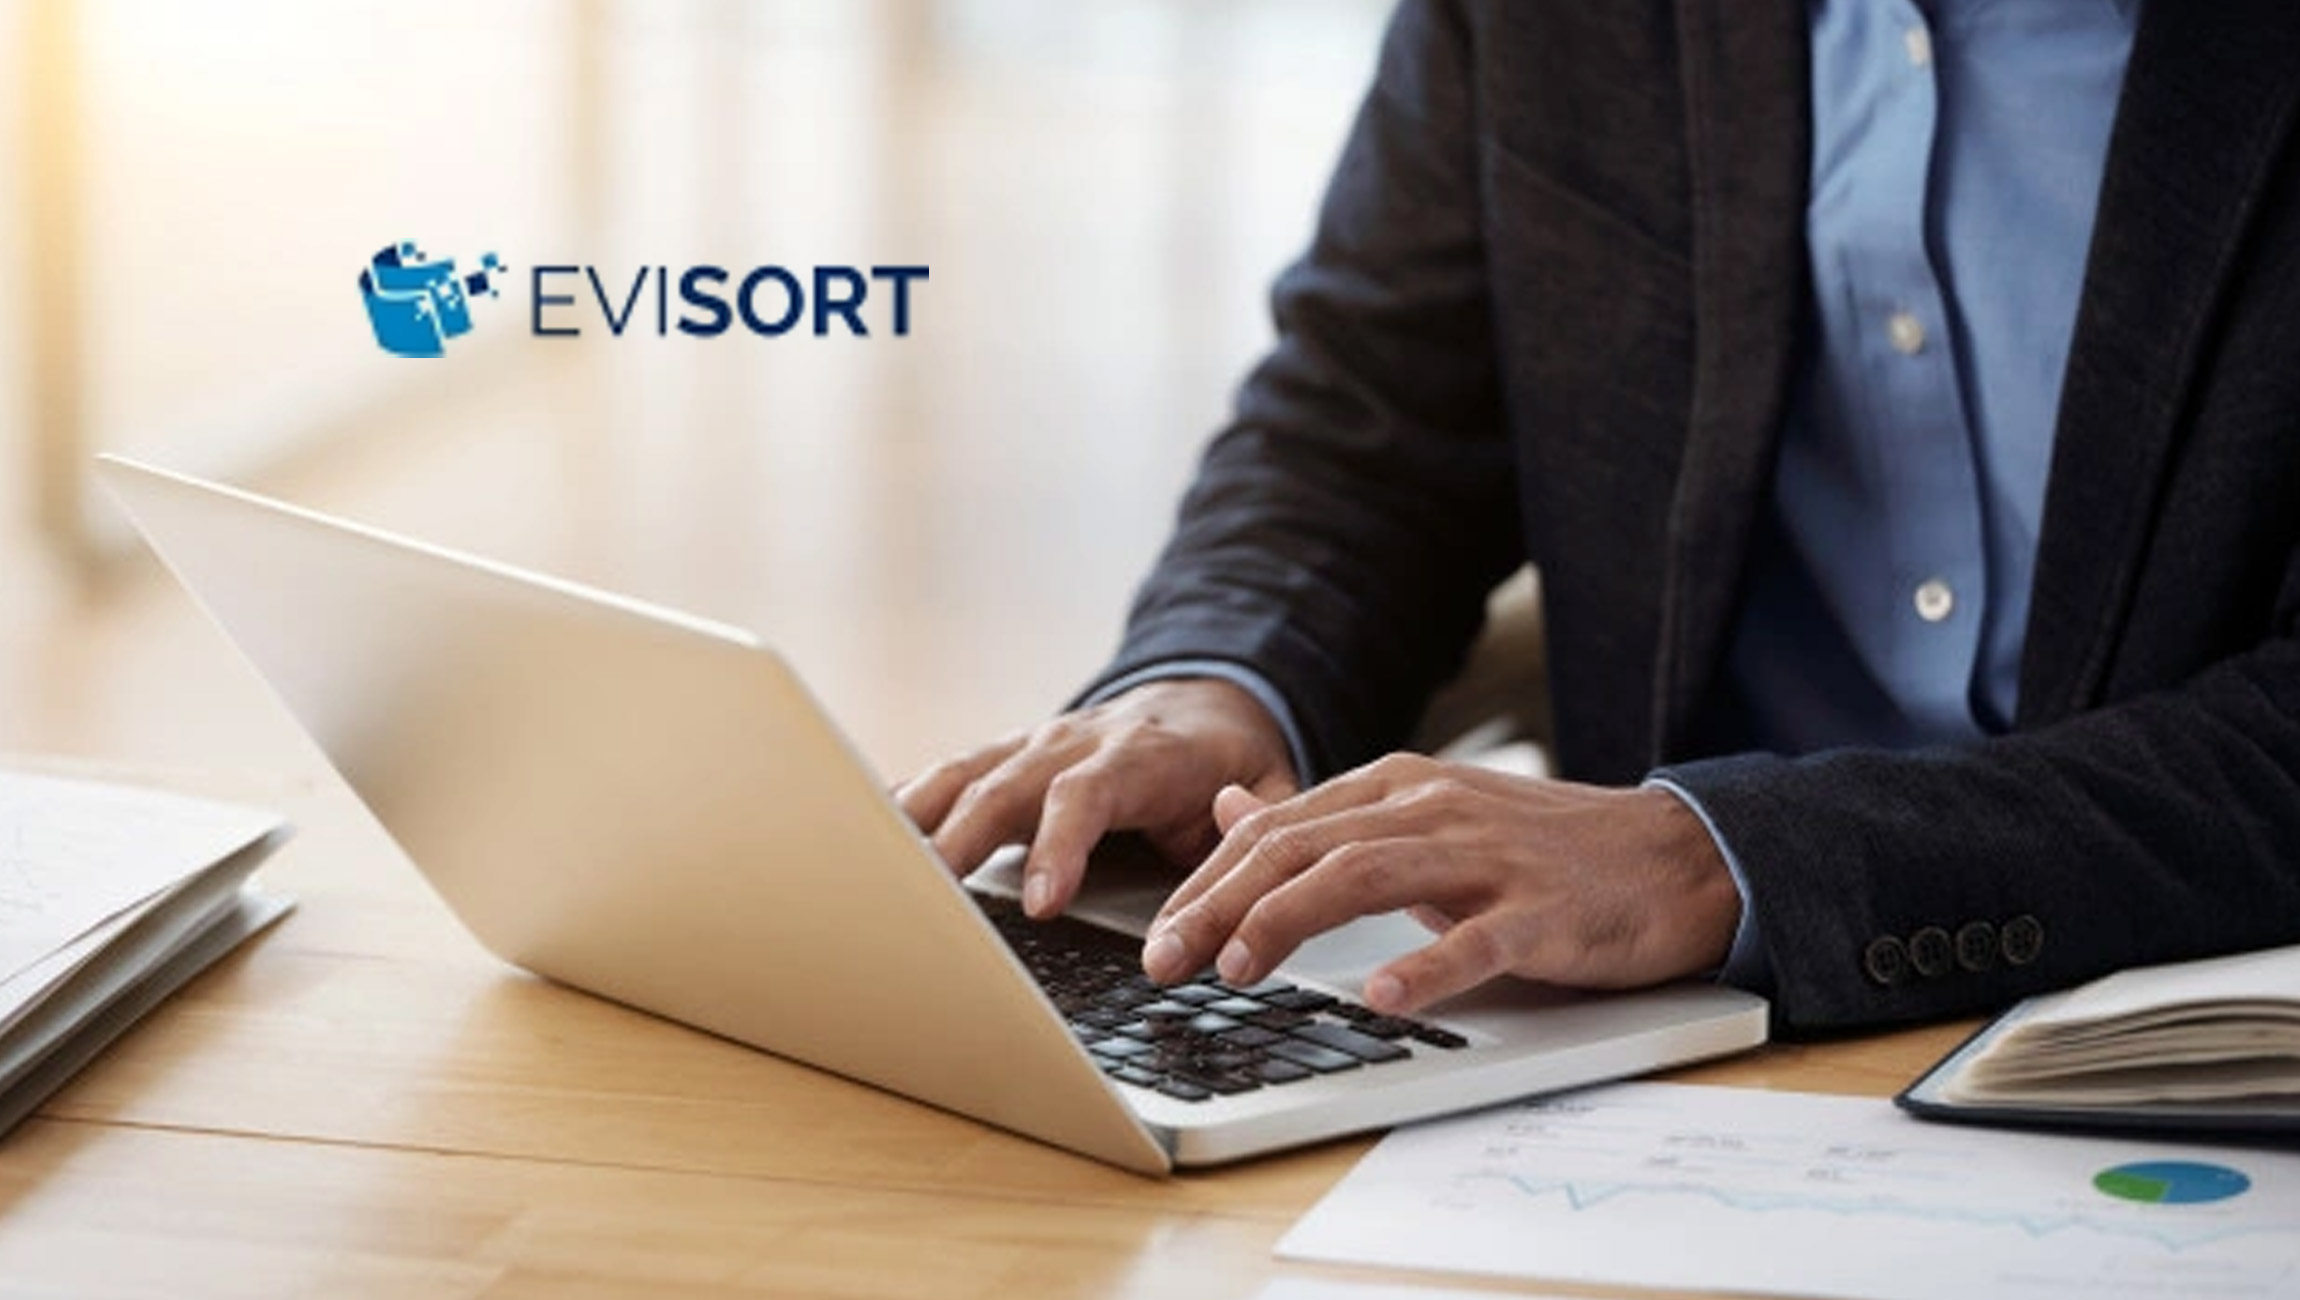 Evisort Recognized as One of Fastest-Growing Companies in 2022 Deloitte Technology Fast 500